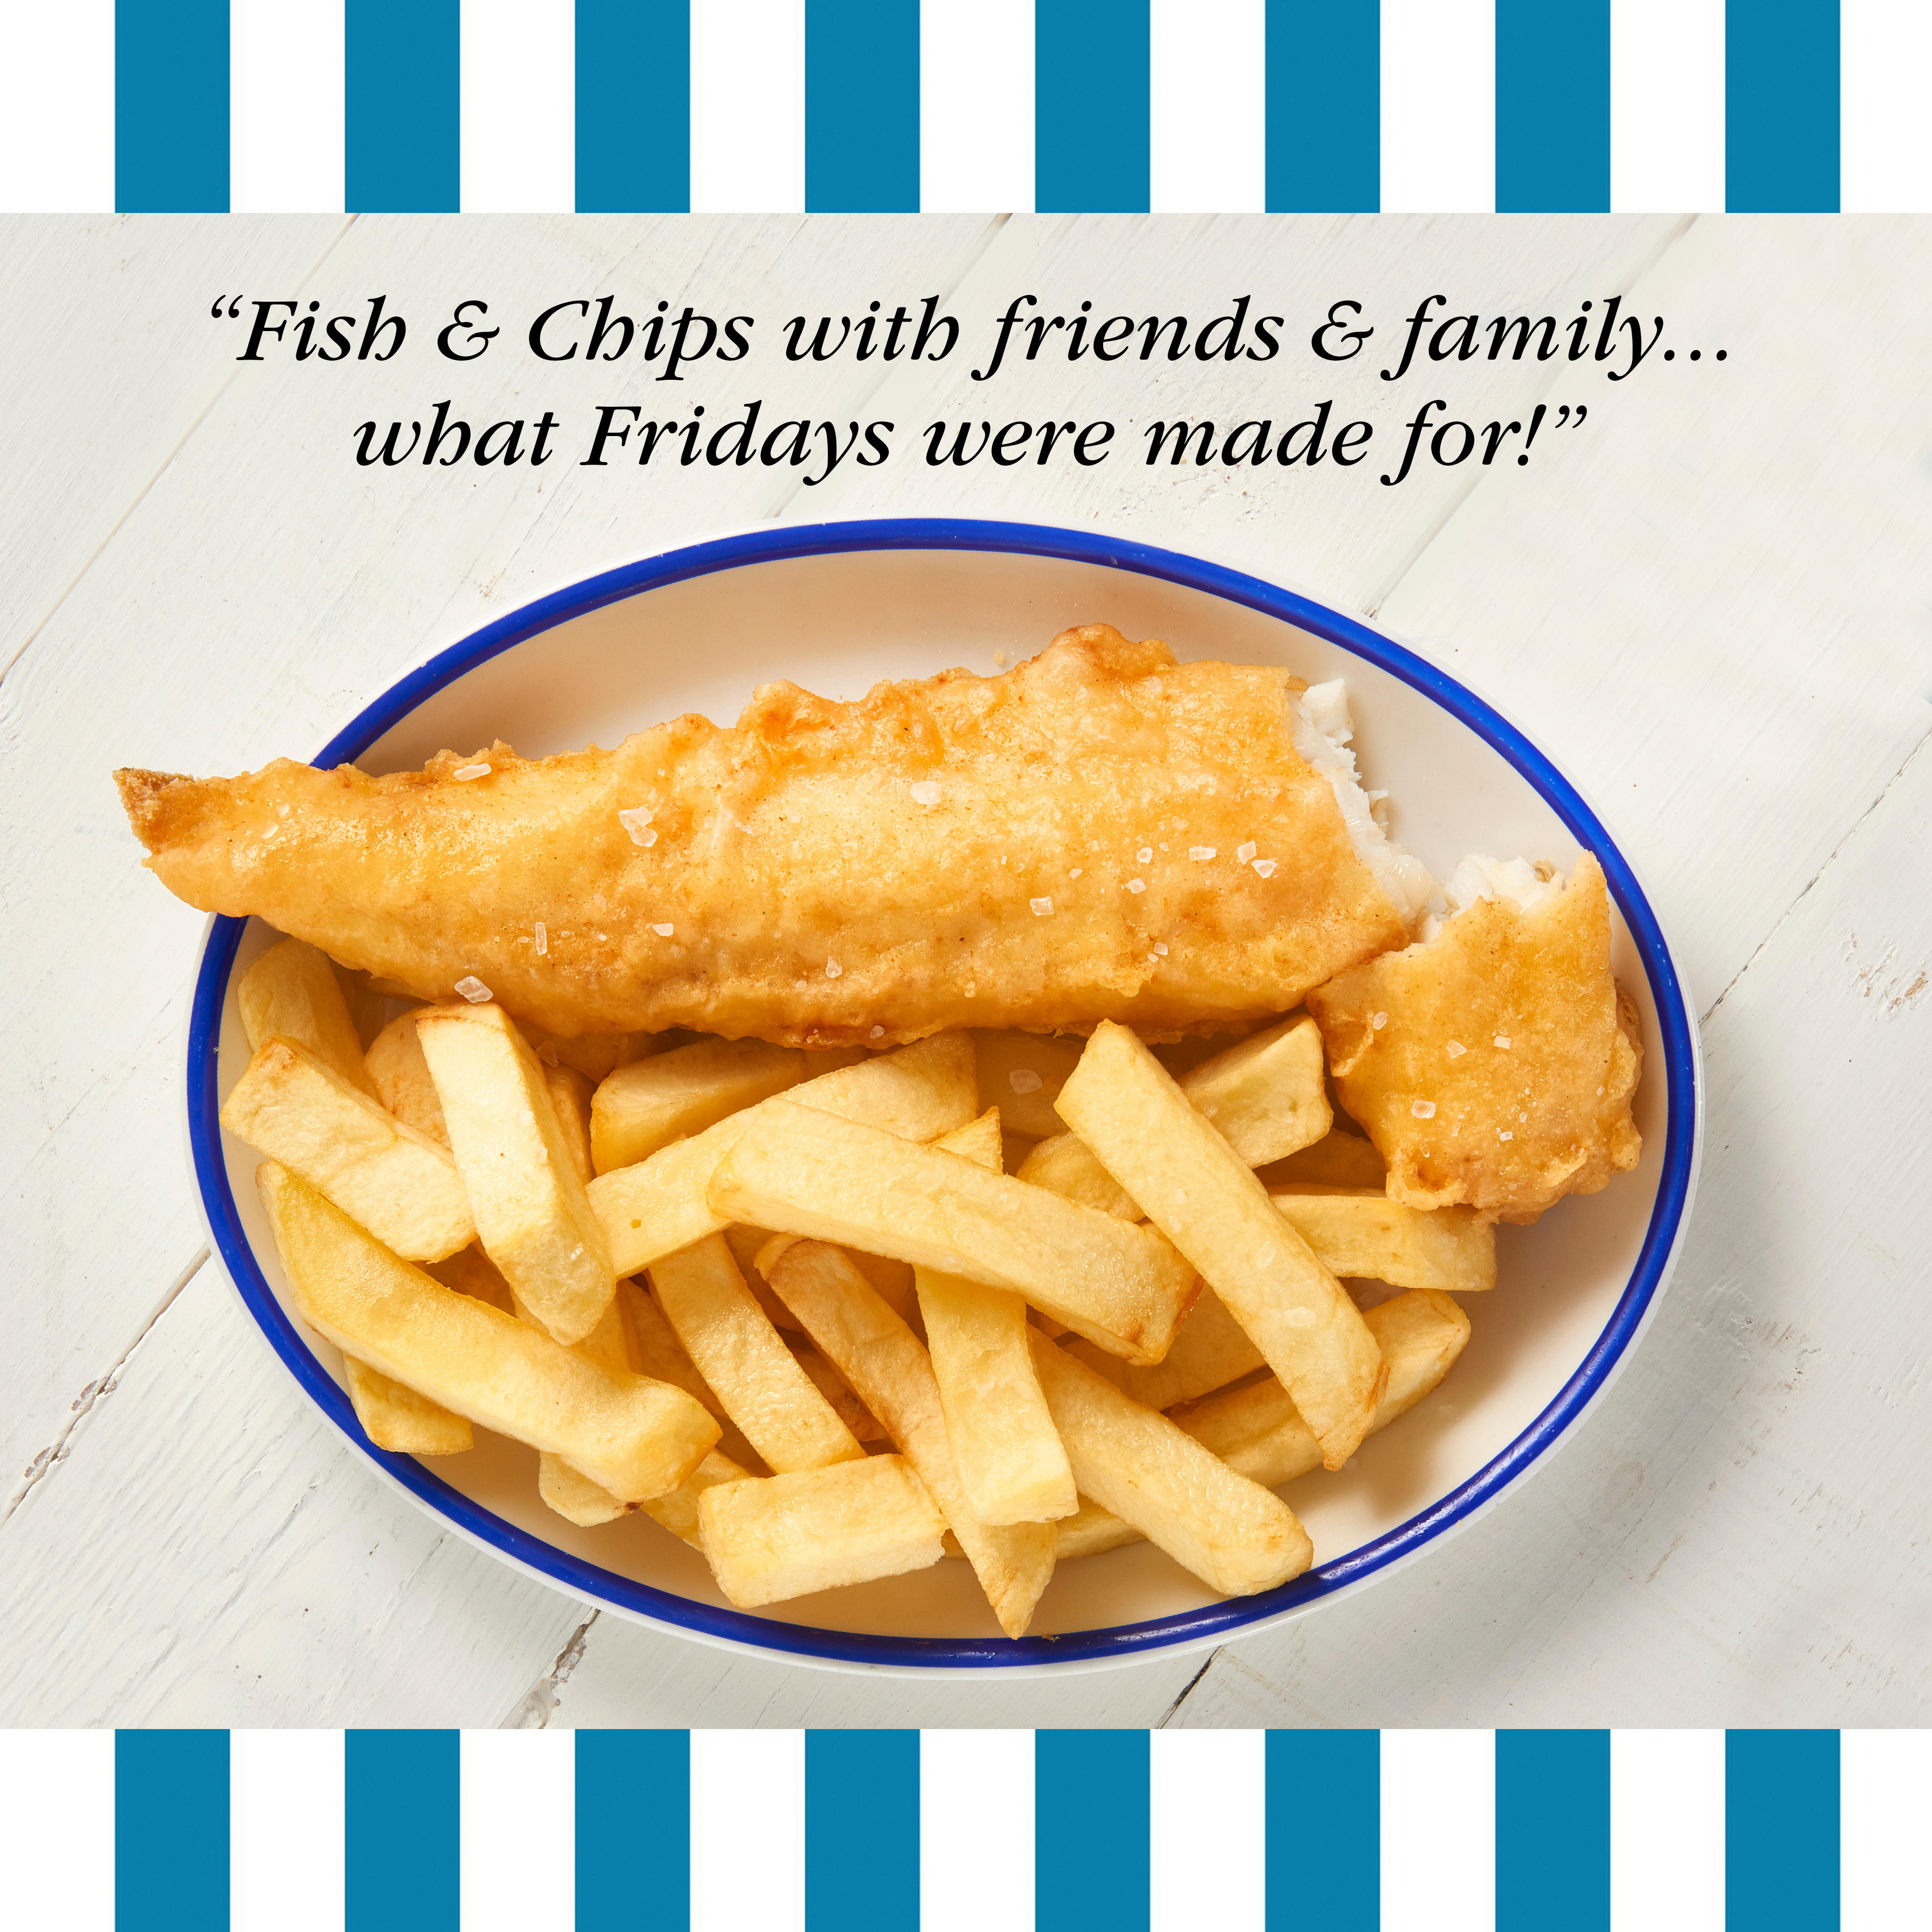 Churchill's Fish & Chips Collier Row Romford 01708 746064